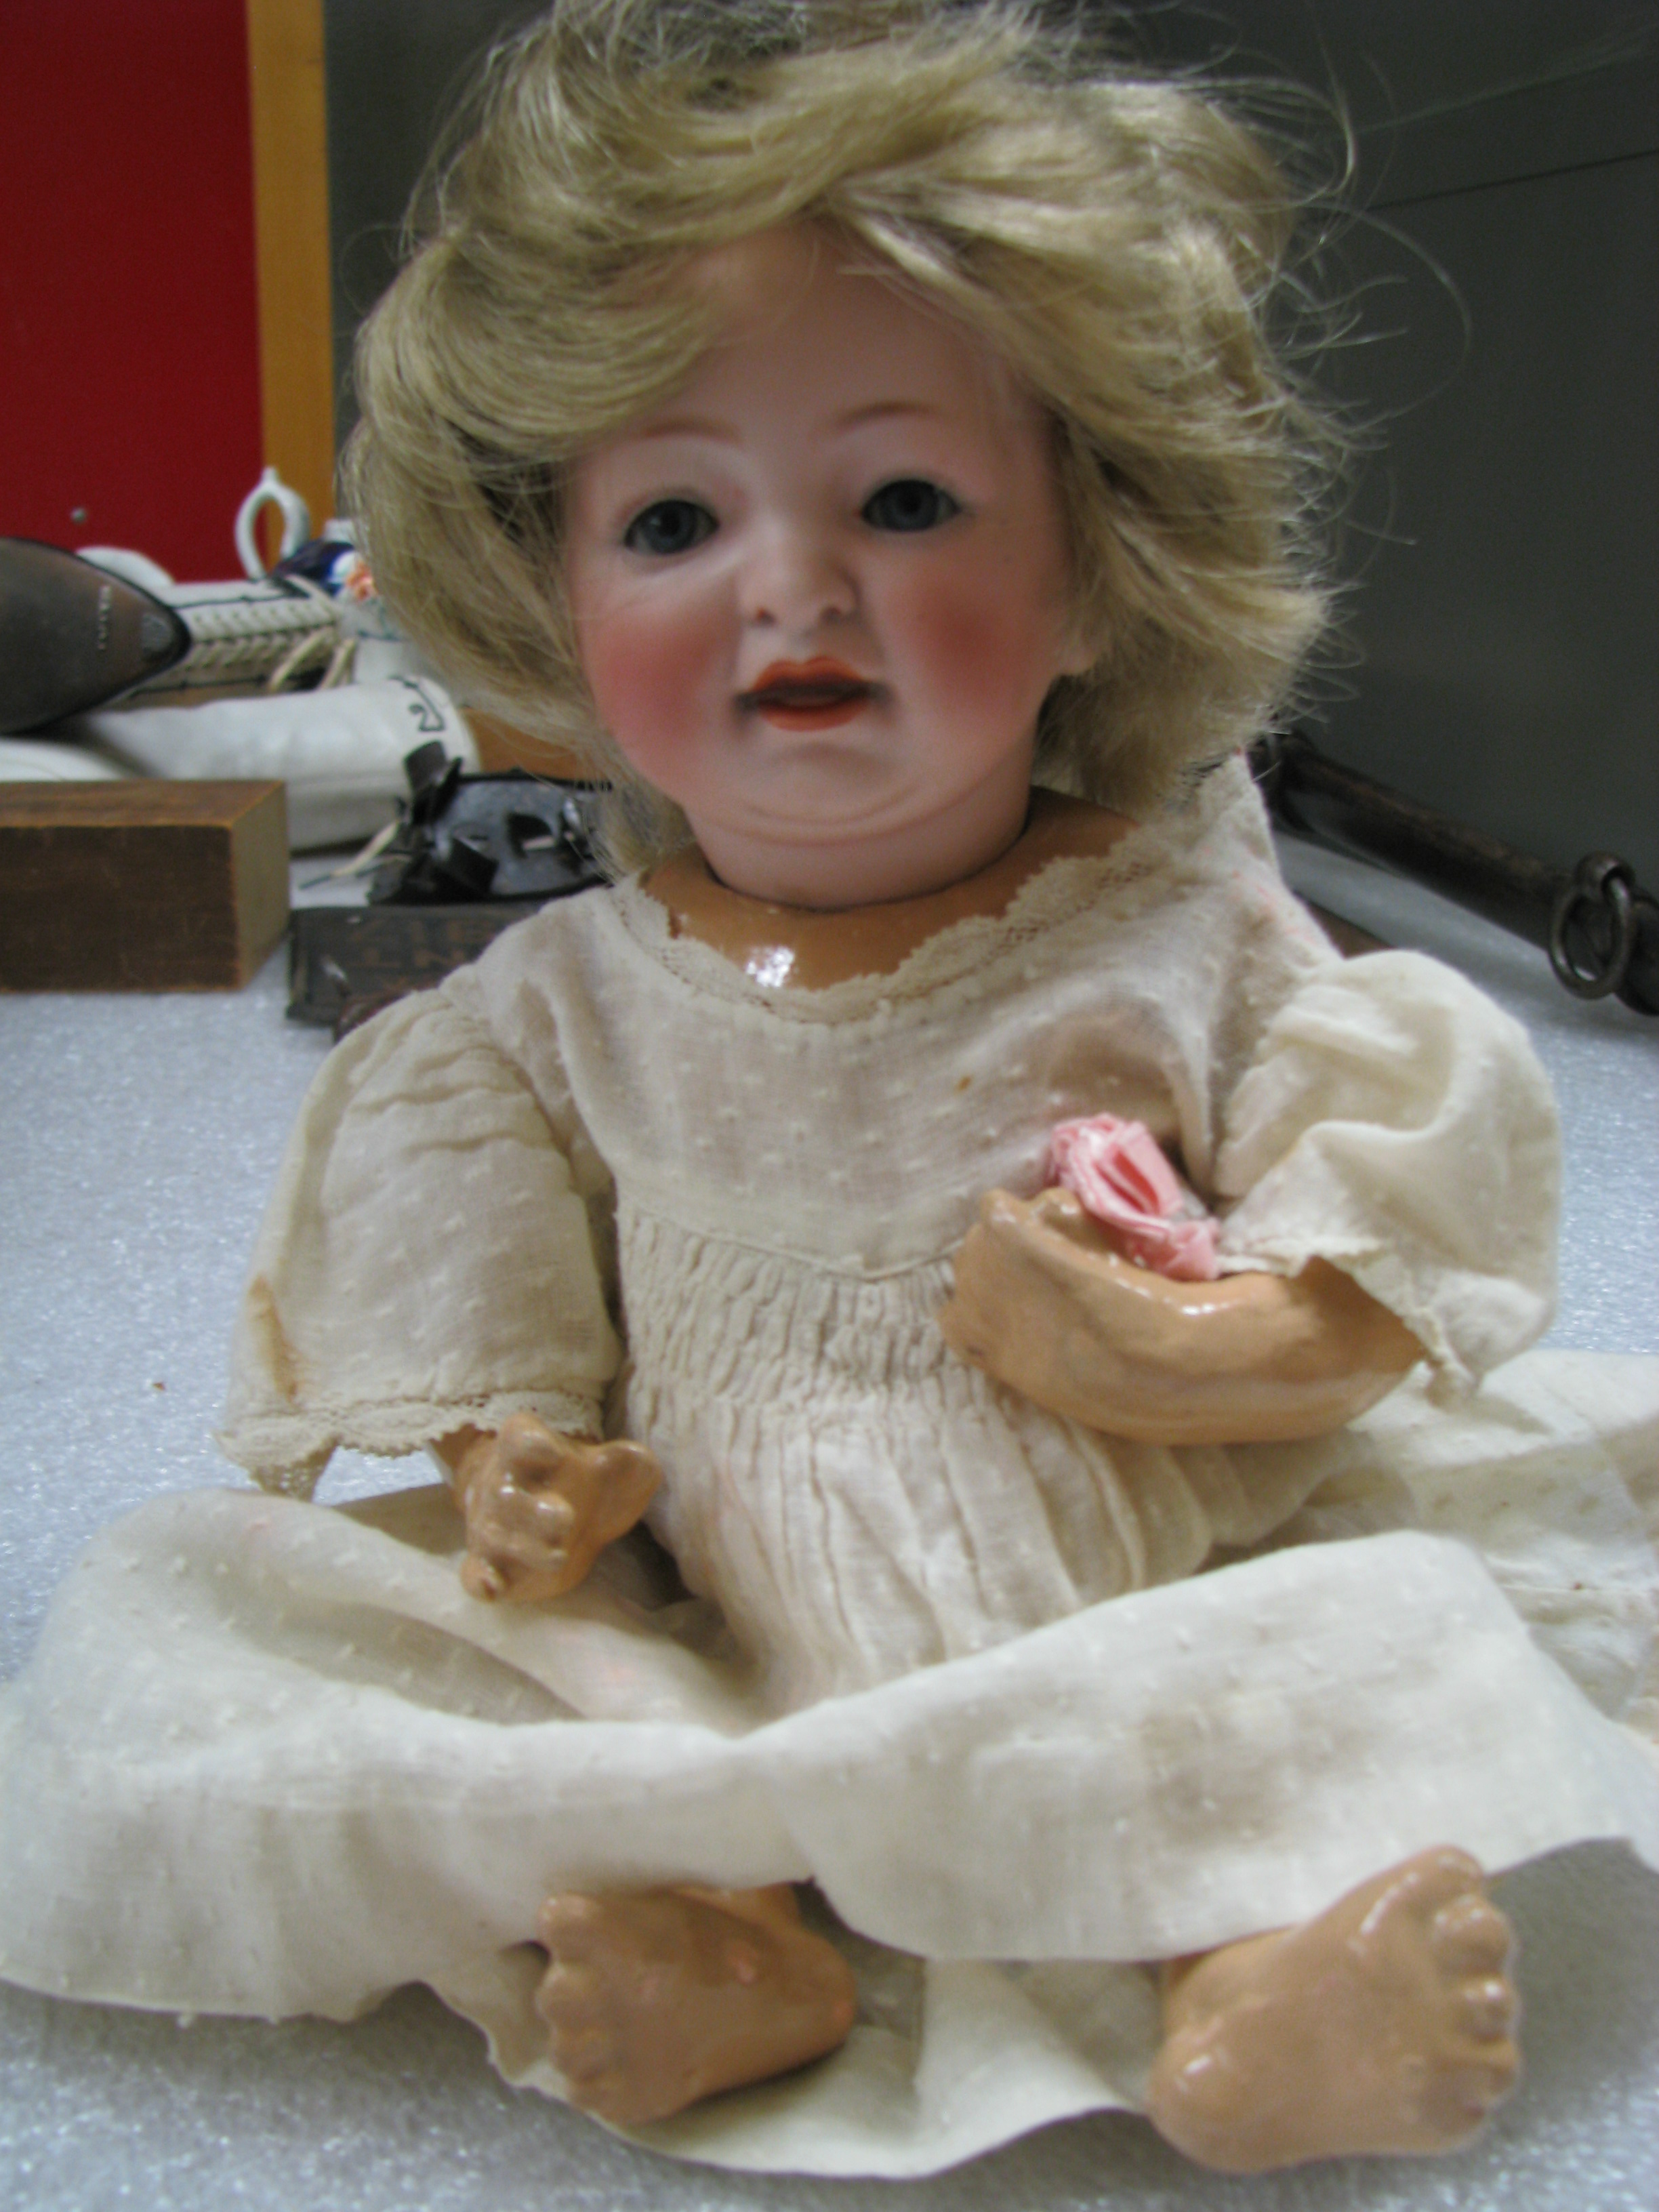 a%20plastic%20doll%20with%20blond%20her%20wearing%20a%20white%20nightgown